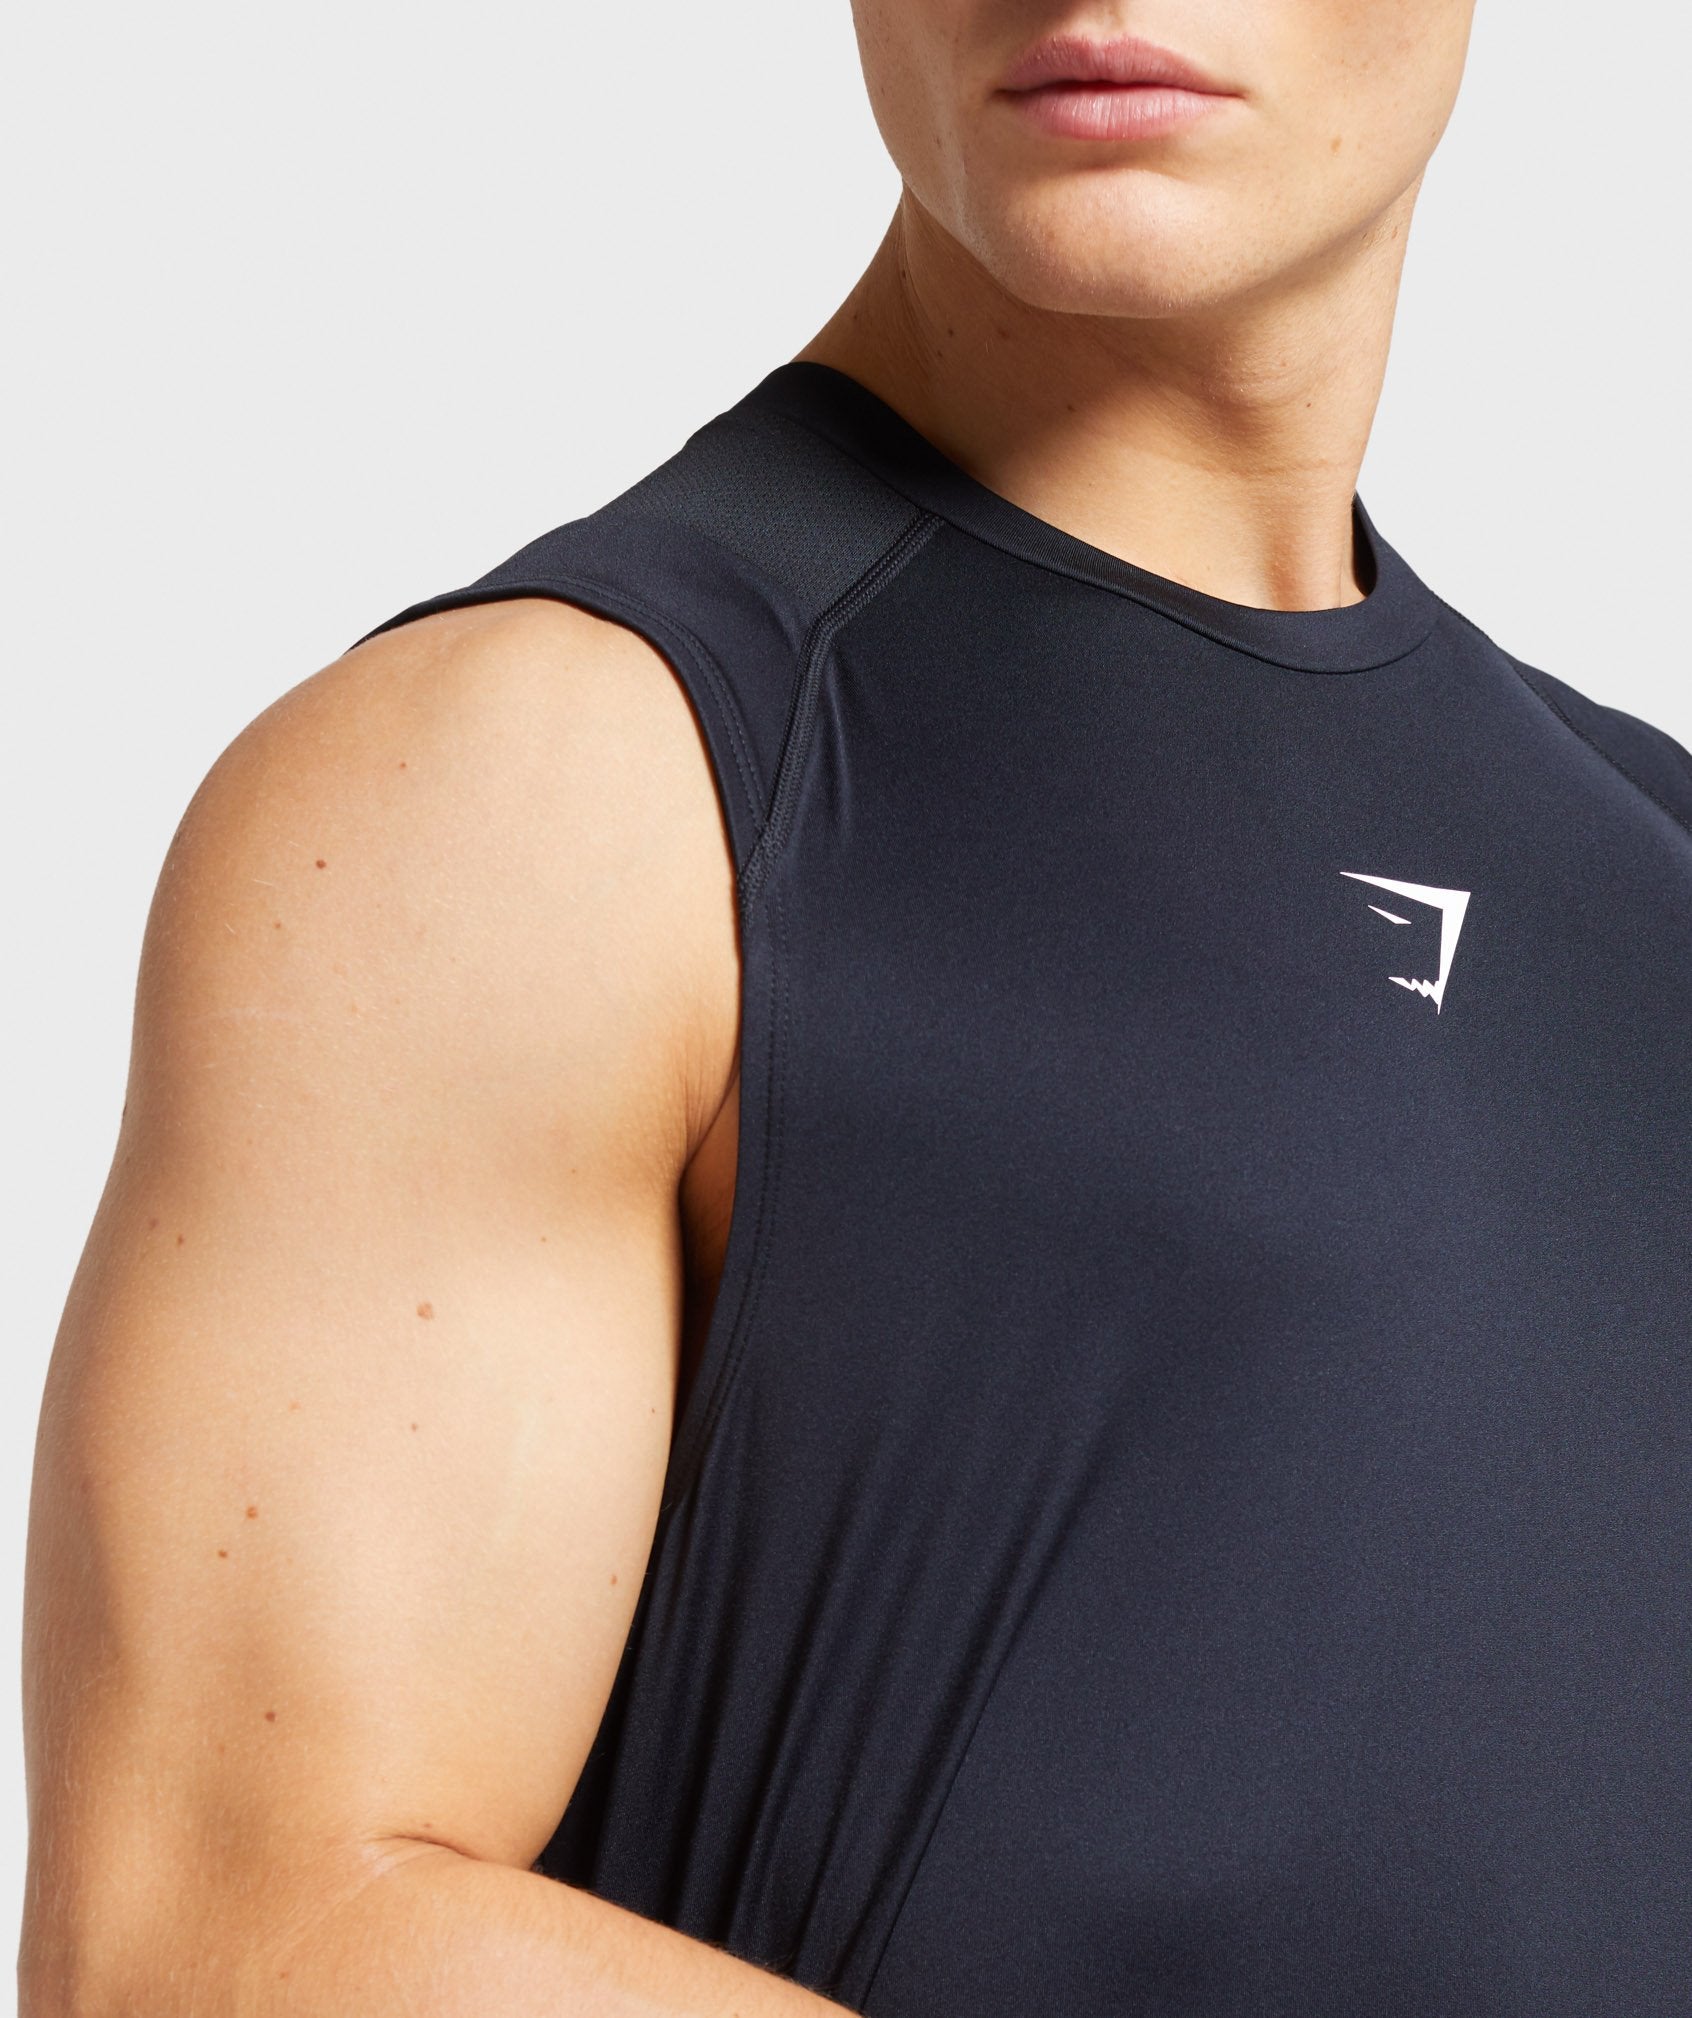 Element Hiit Tank in Black - view 5